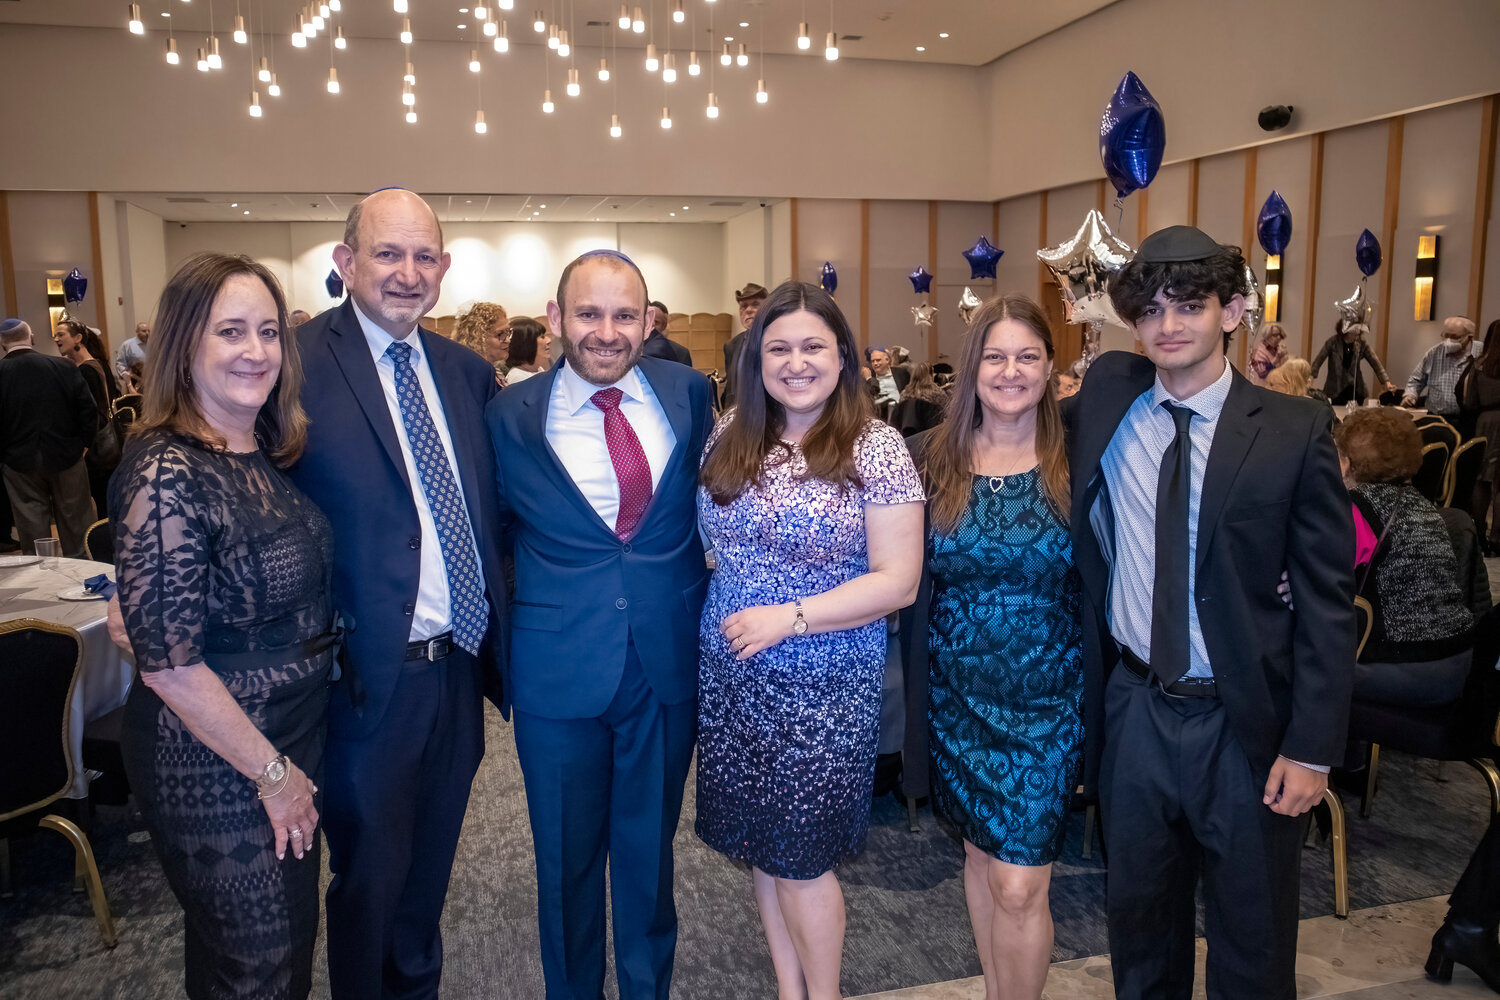 Senior Rabbi Joshua Dorsch, center, was officially installed at the Merrick Jewish Centre on Saturday. He was joined by members of his family, including from left, Deborah-Jo Essrog, Jay Dorsch, his wife, Stef Dorsch , Sandi Millman, Asher Millman.